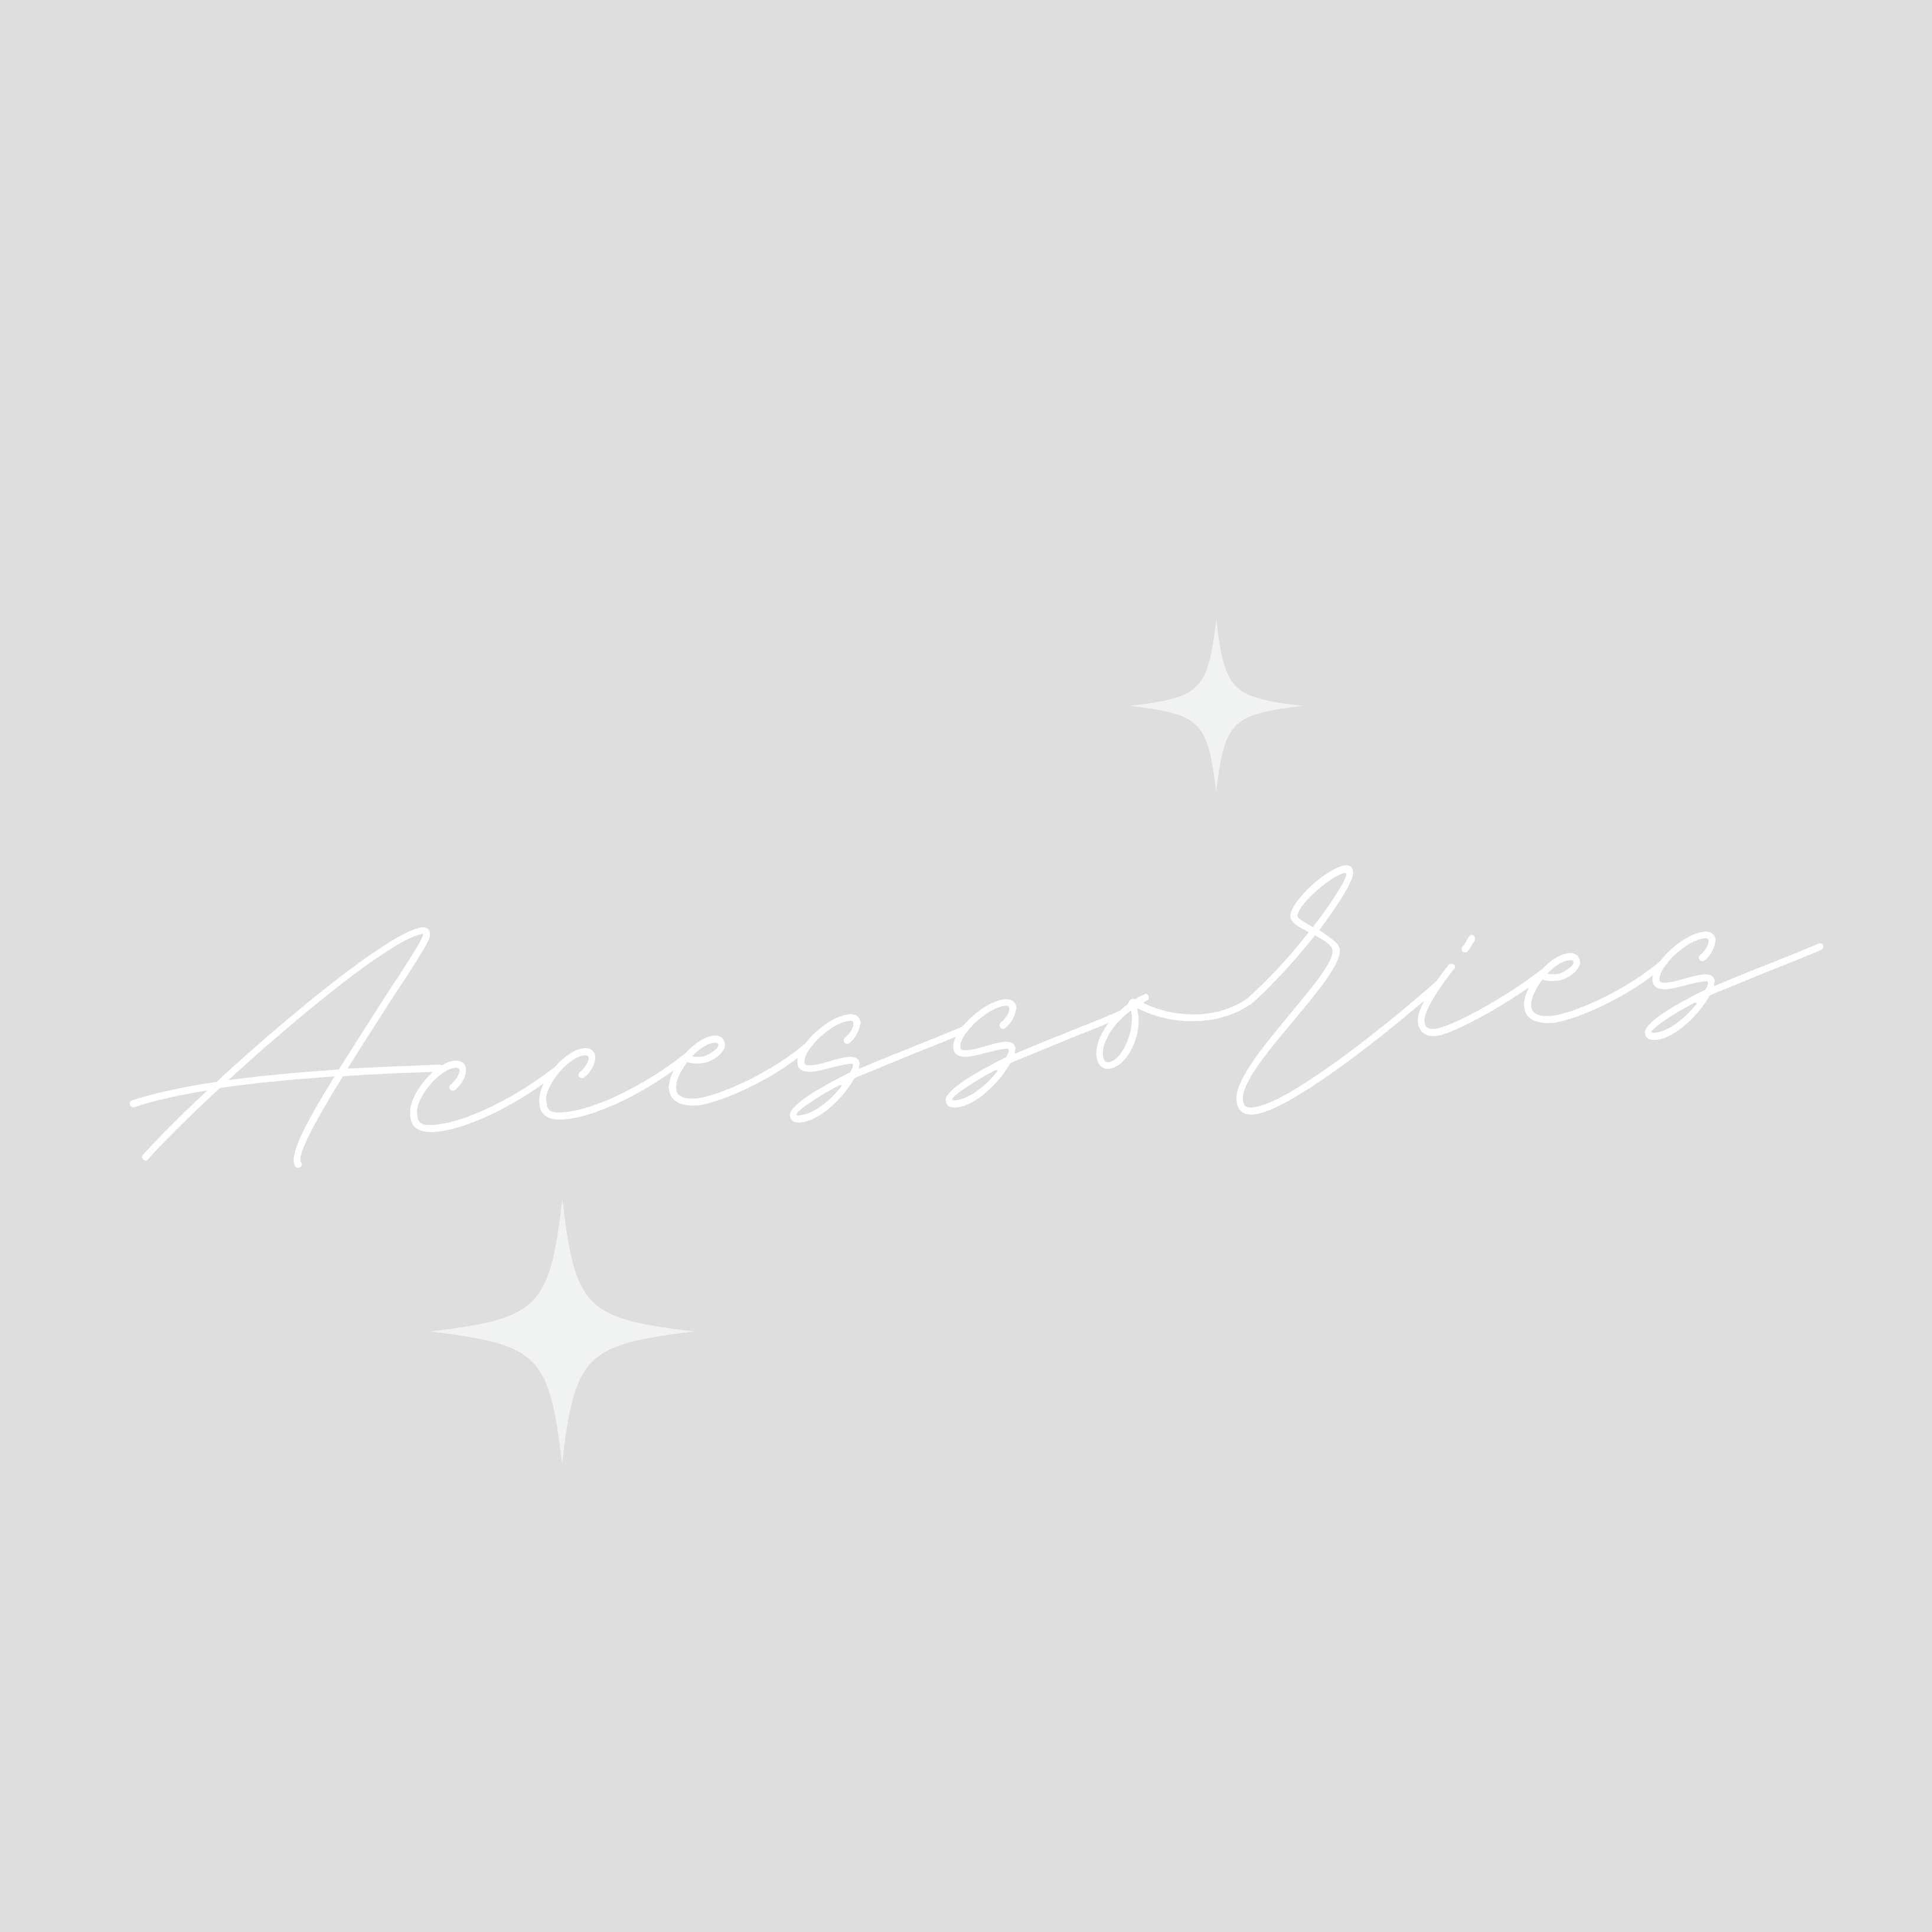 Accessories Sassy Sisters Boutique Llc